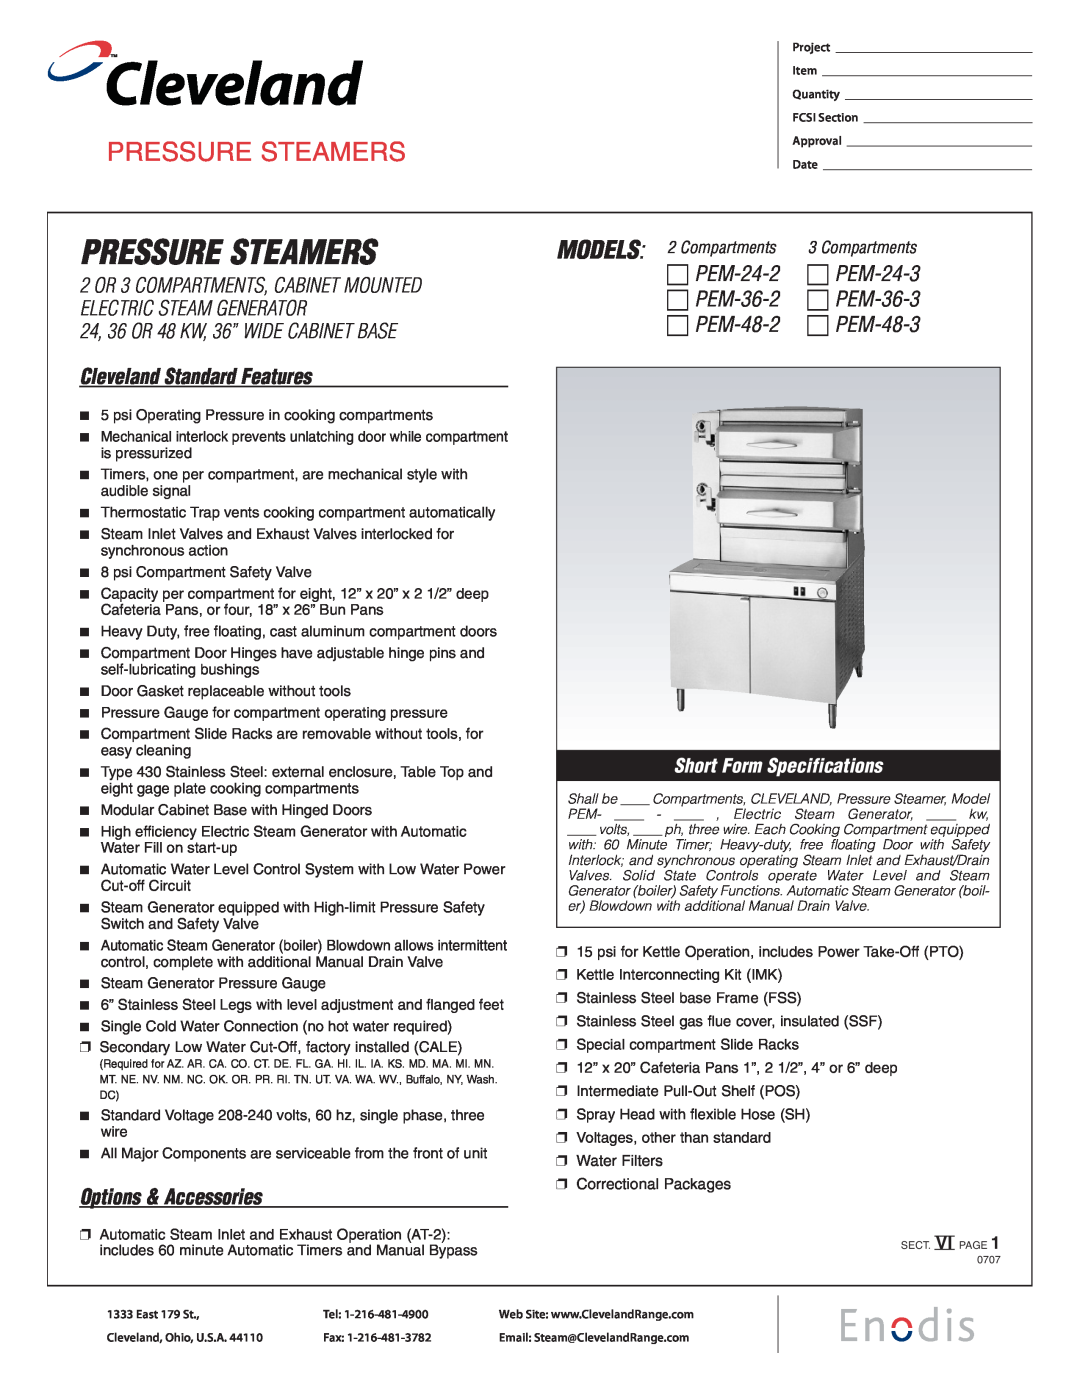 Cleveland Range PEM-36-3 specifications Pressure Steamers, Models, Cleveland Standard Features, Options & Accessories 